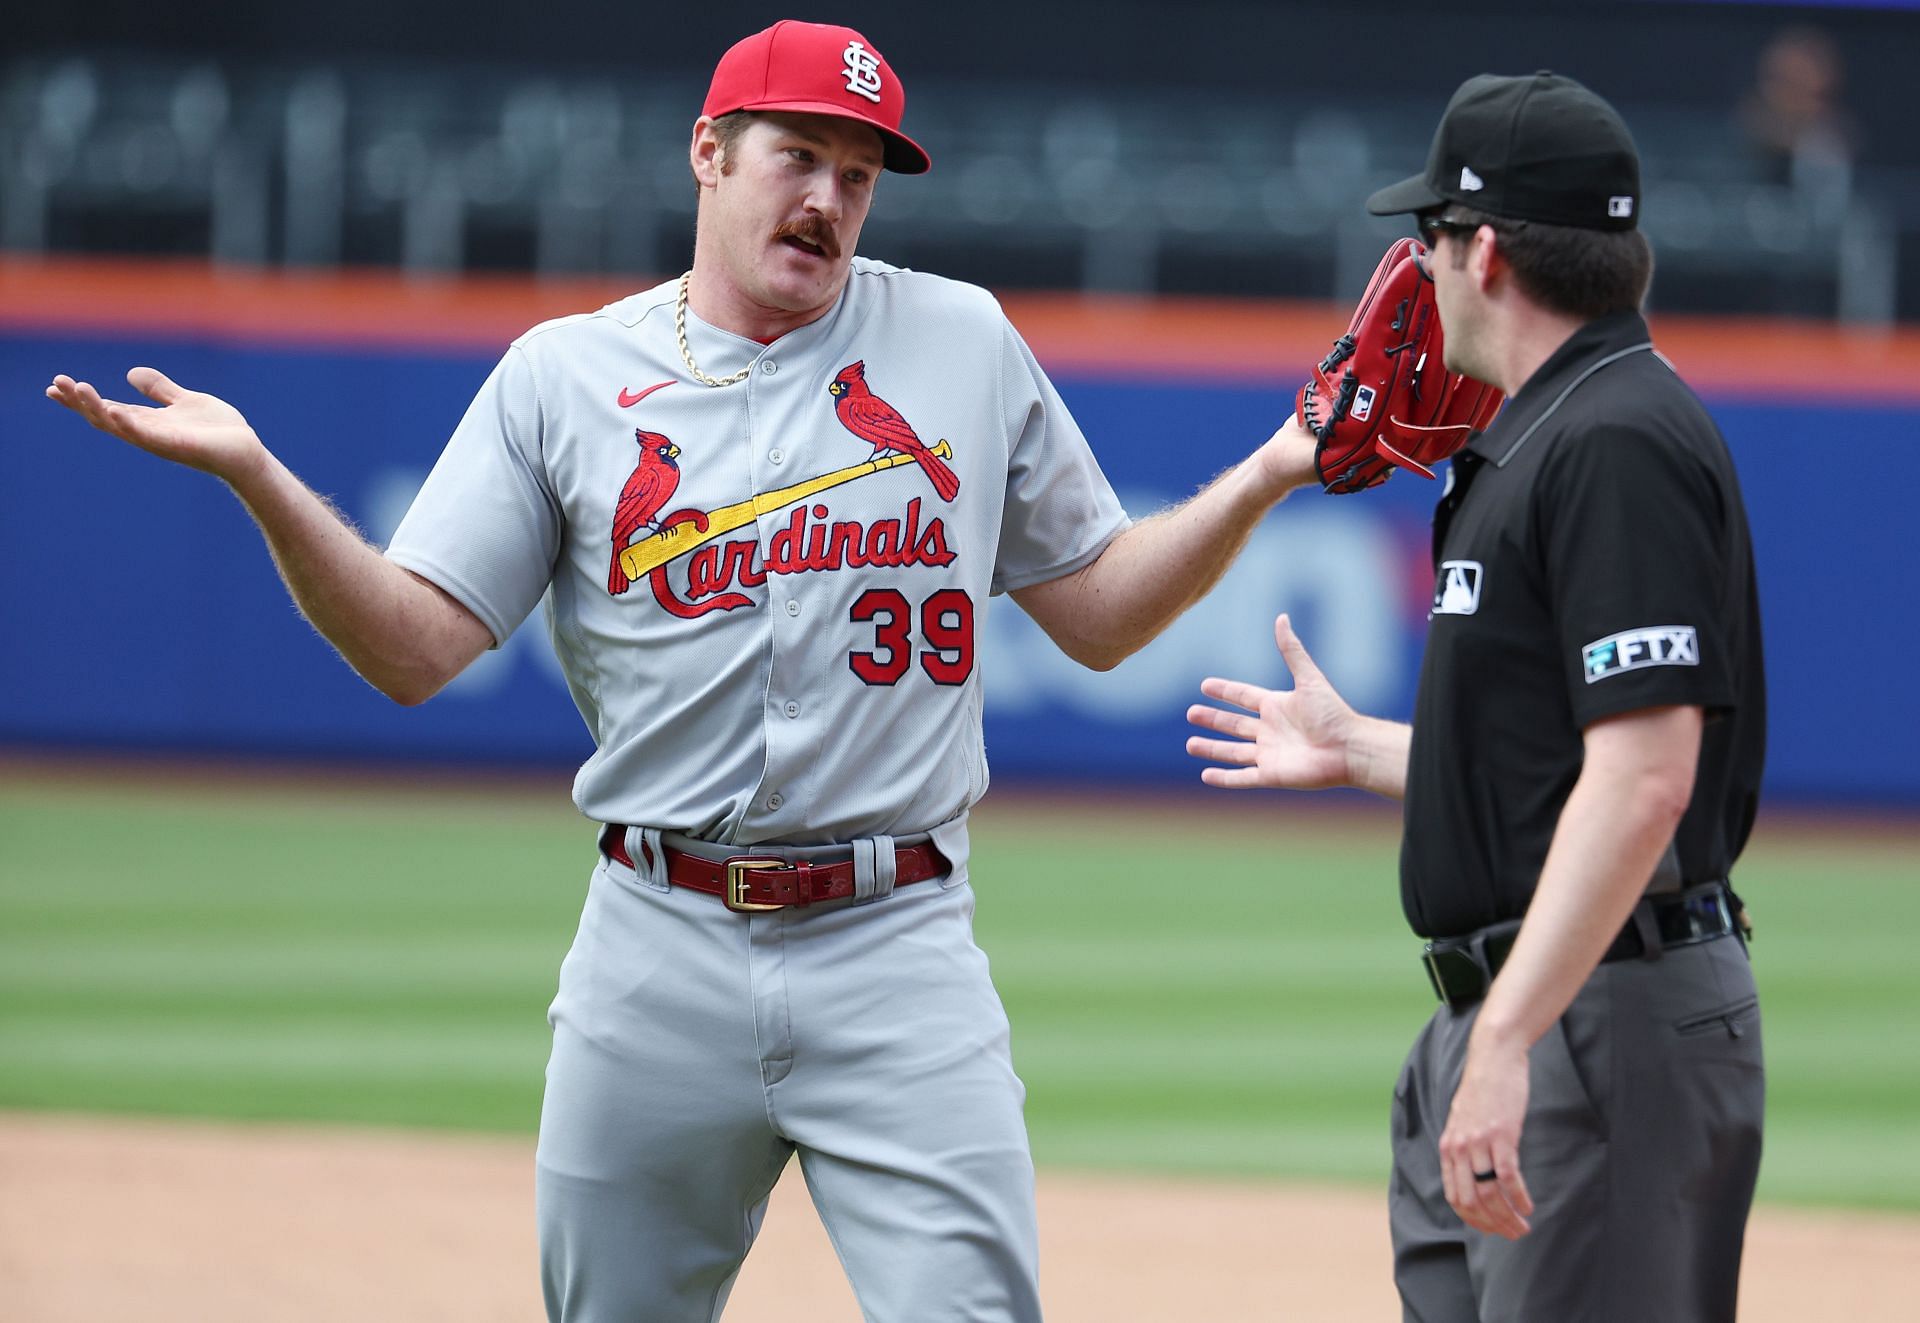 Miles Mikolas' remarkable return to the big leagues earns an All